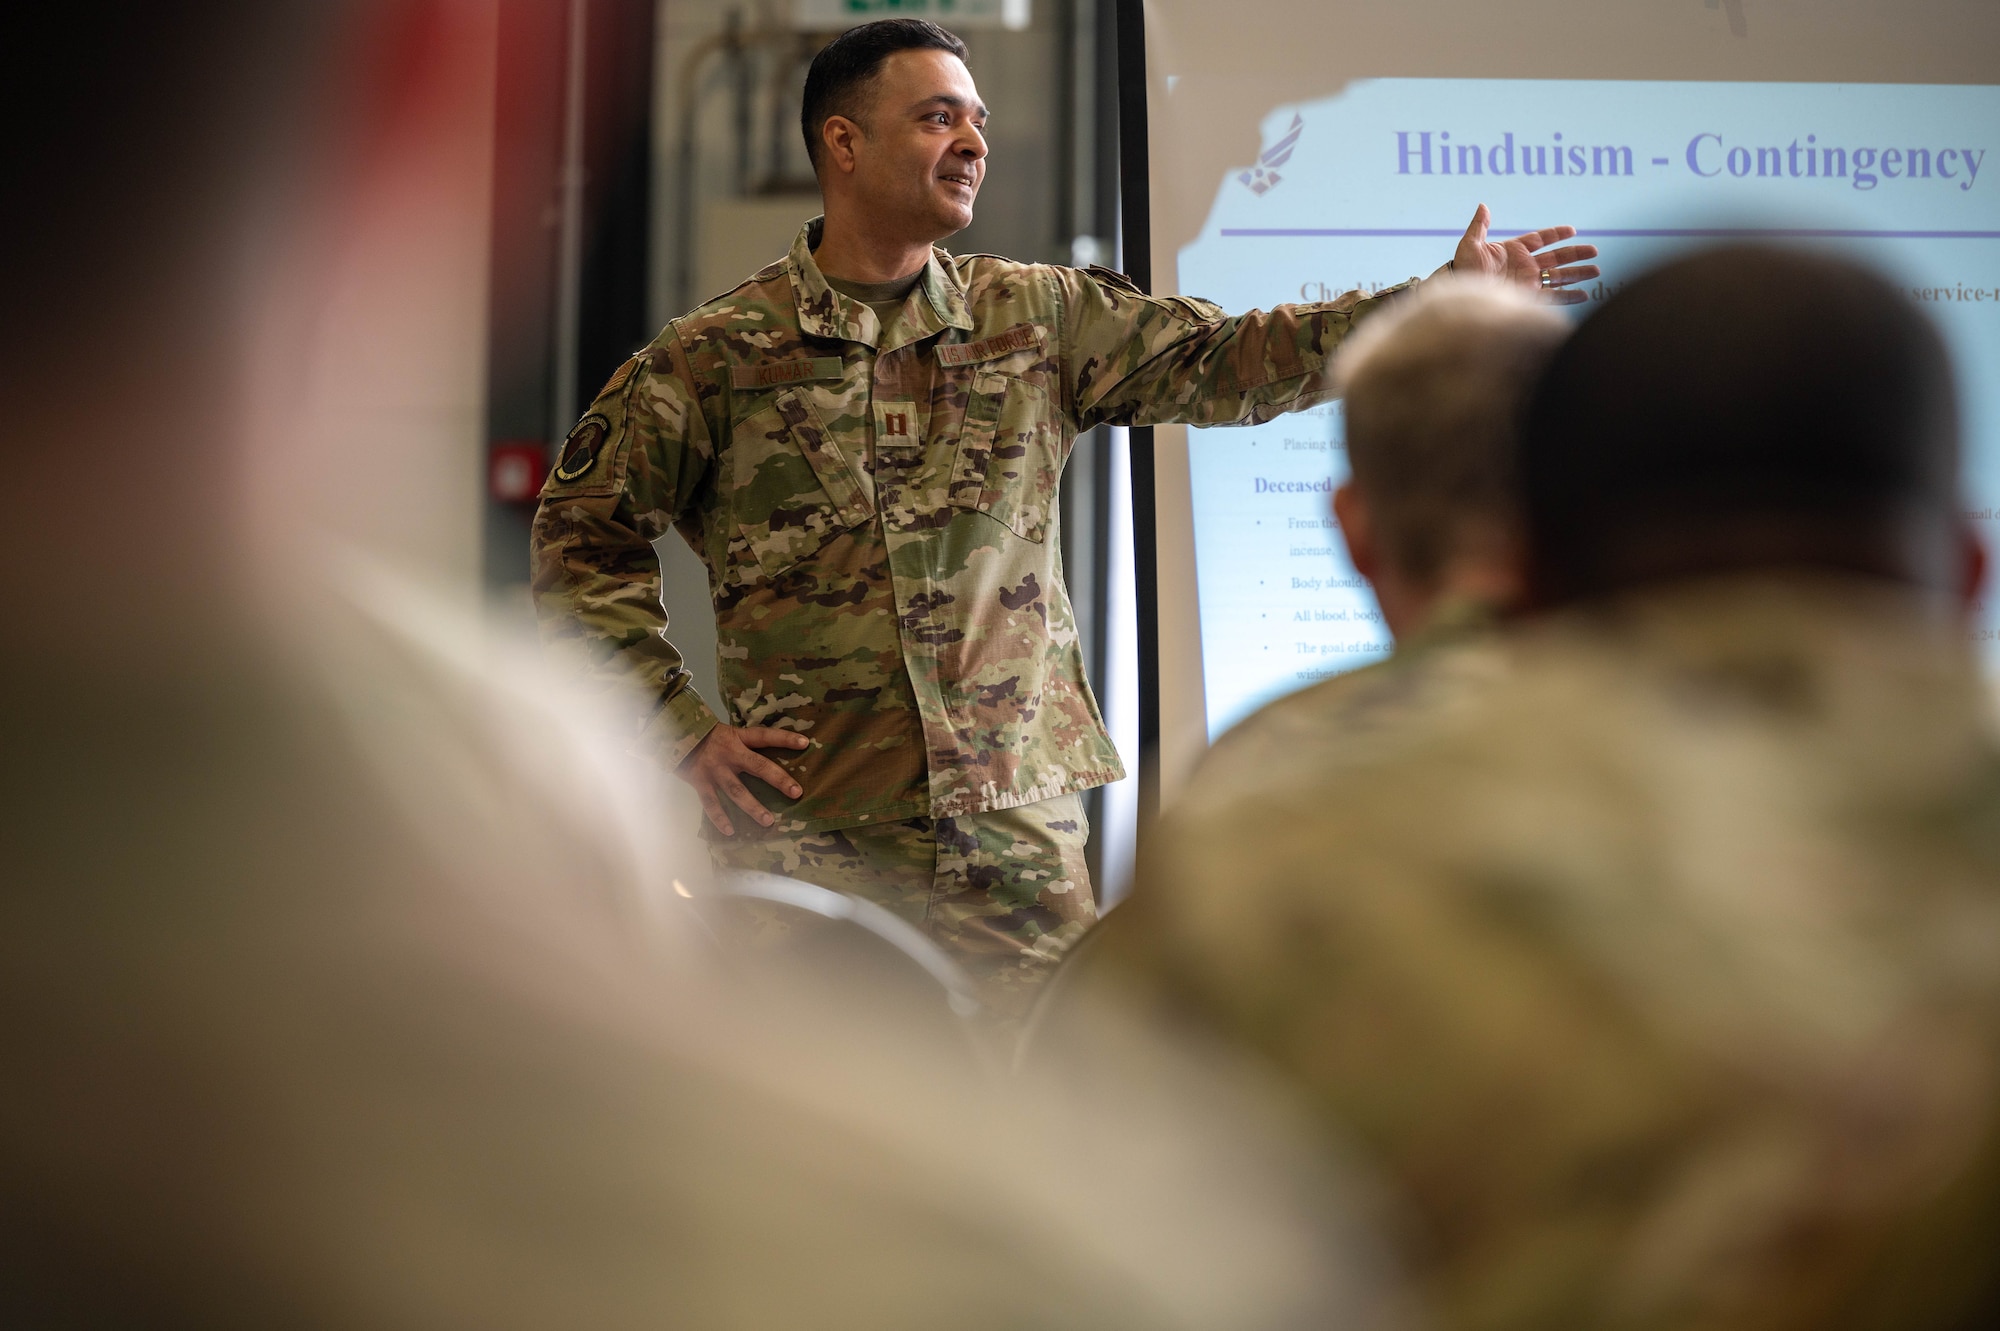 U.S. Air Force Capt. Vikas Kumar, 86th Operations Support Squadron aerospace physiologist, presents slides on Hinduism during a joint religious support team training